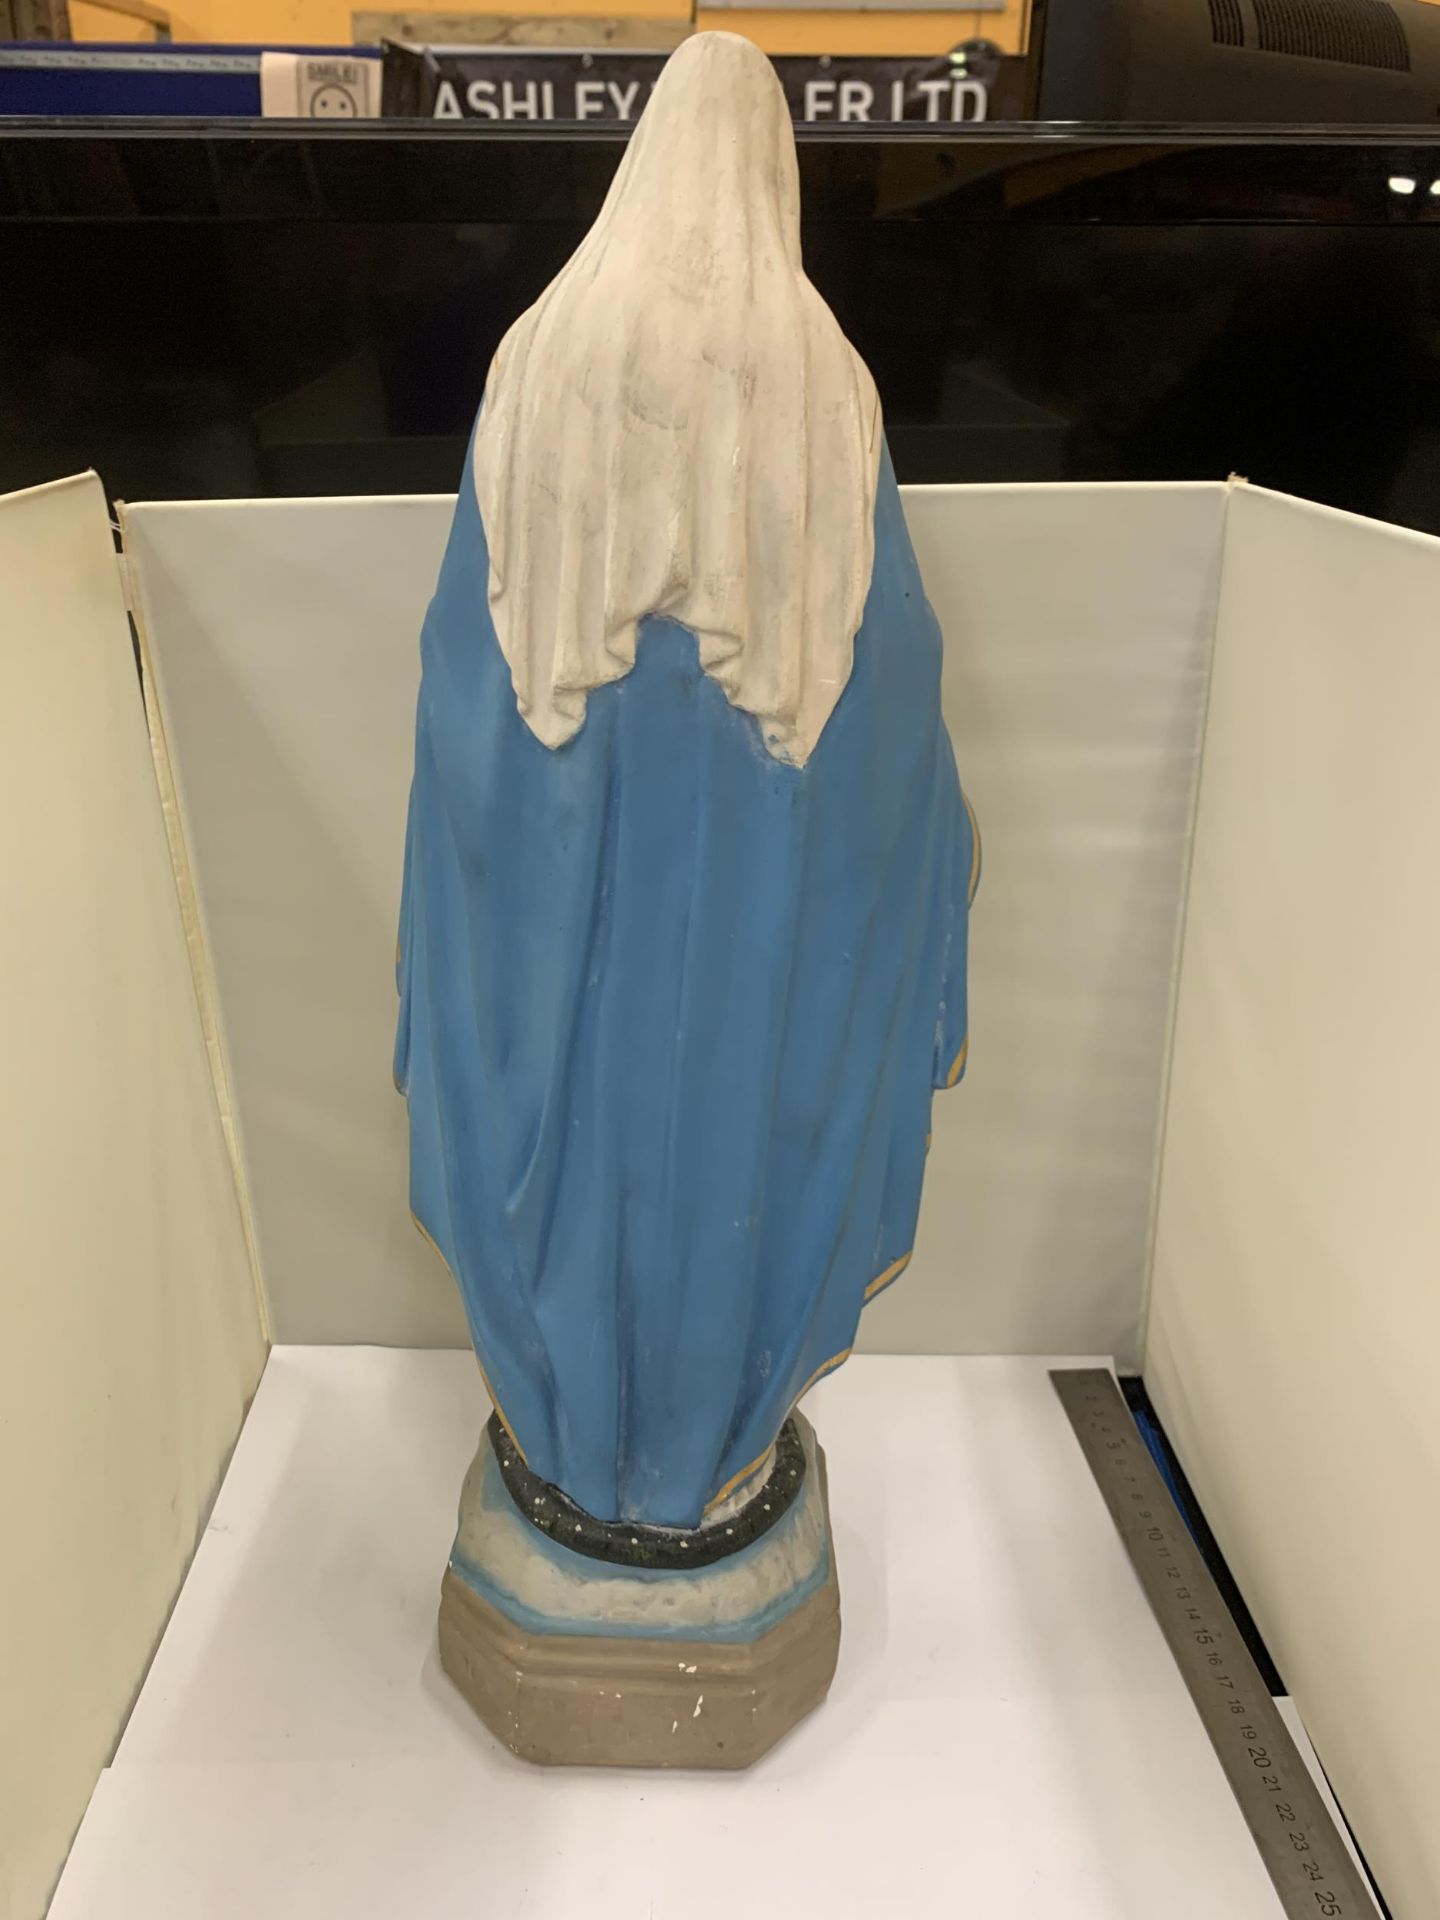 A LARGE FIGURE OF THE VIRGIN MARY 52CM TALL - Image 5 of 6